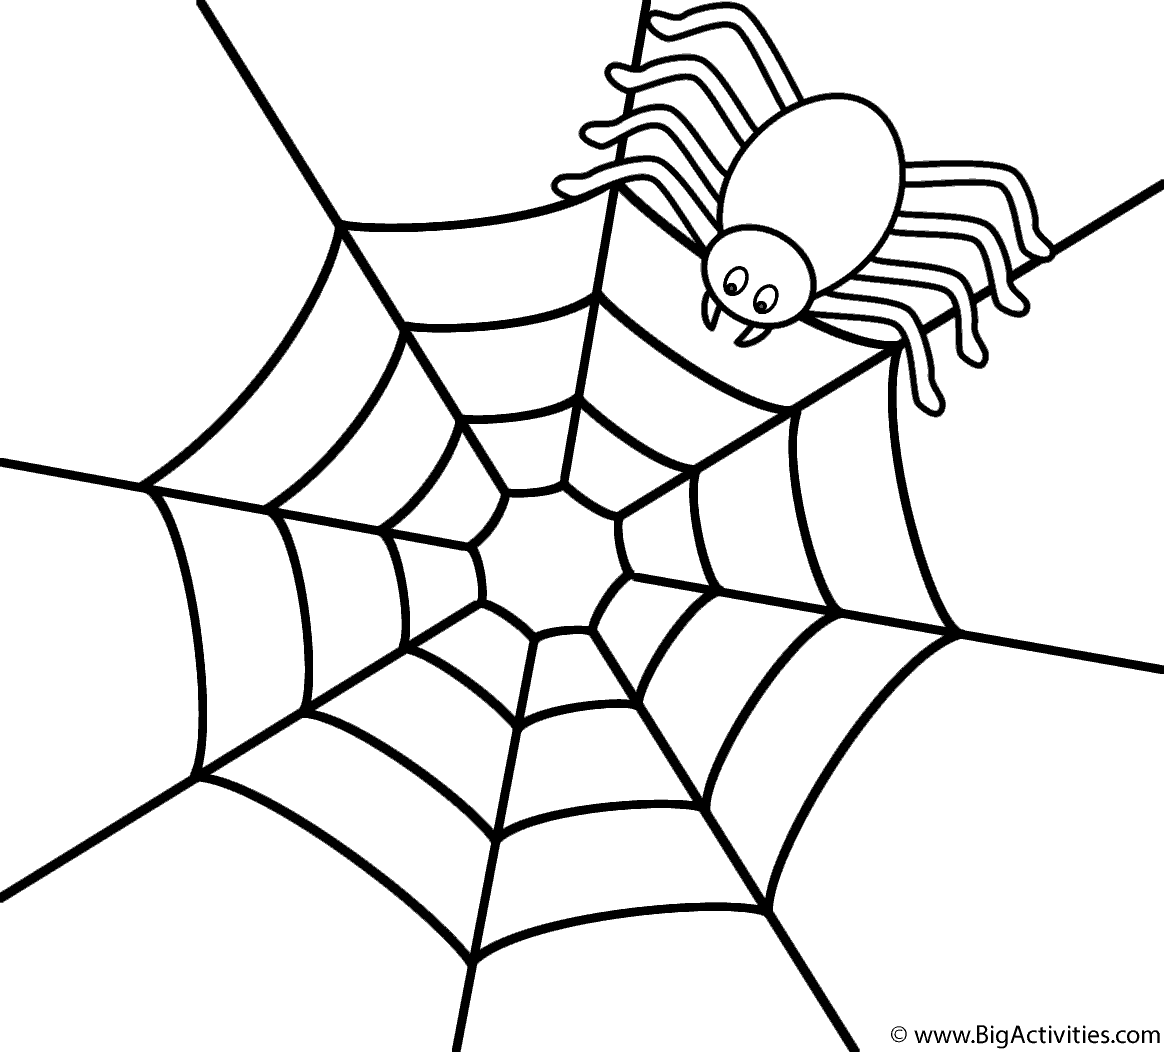 Spider on the top of web - Coloring Page (Halloween)